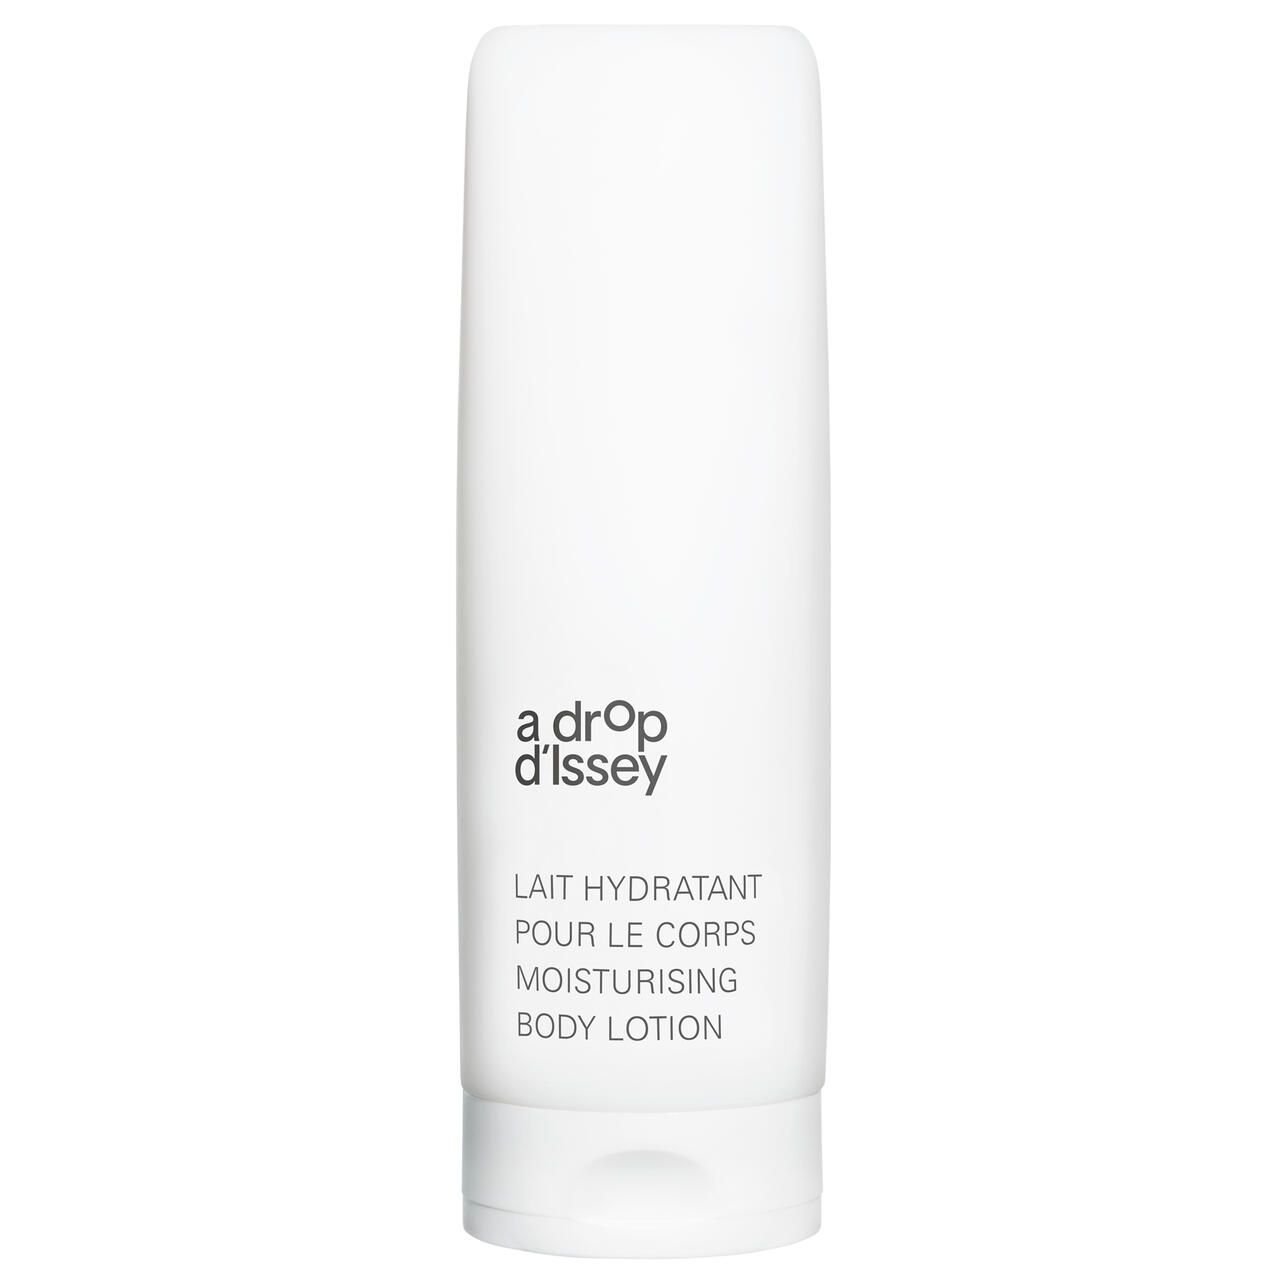 Issey Miyake, A Drop d'Issey Body Lotion